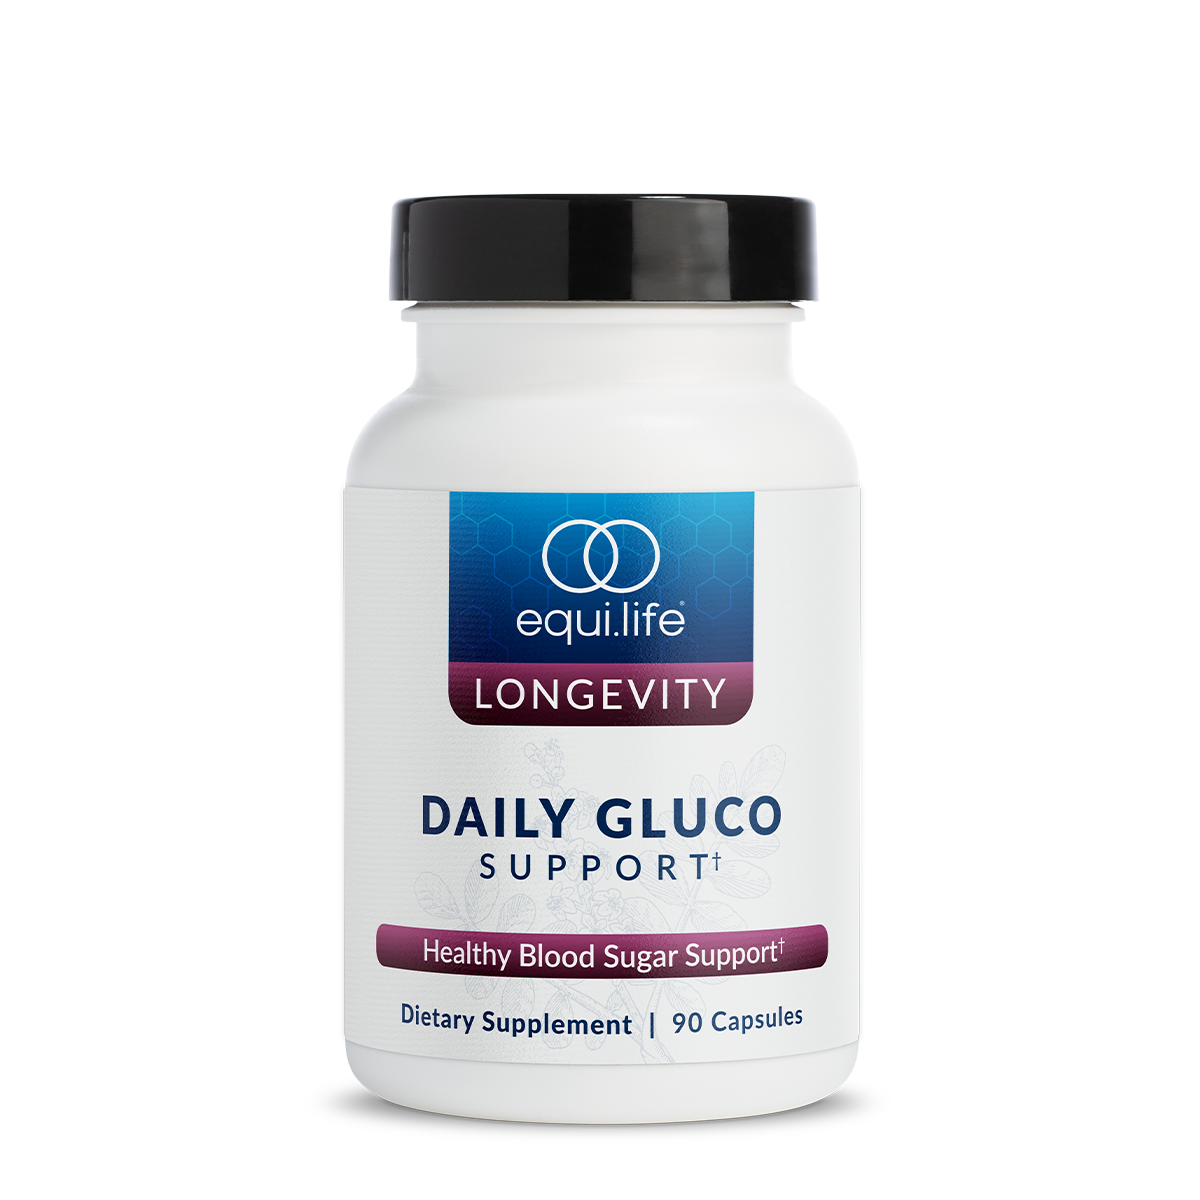 Daily Gluco Support